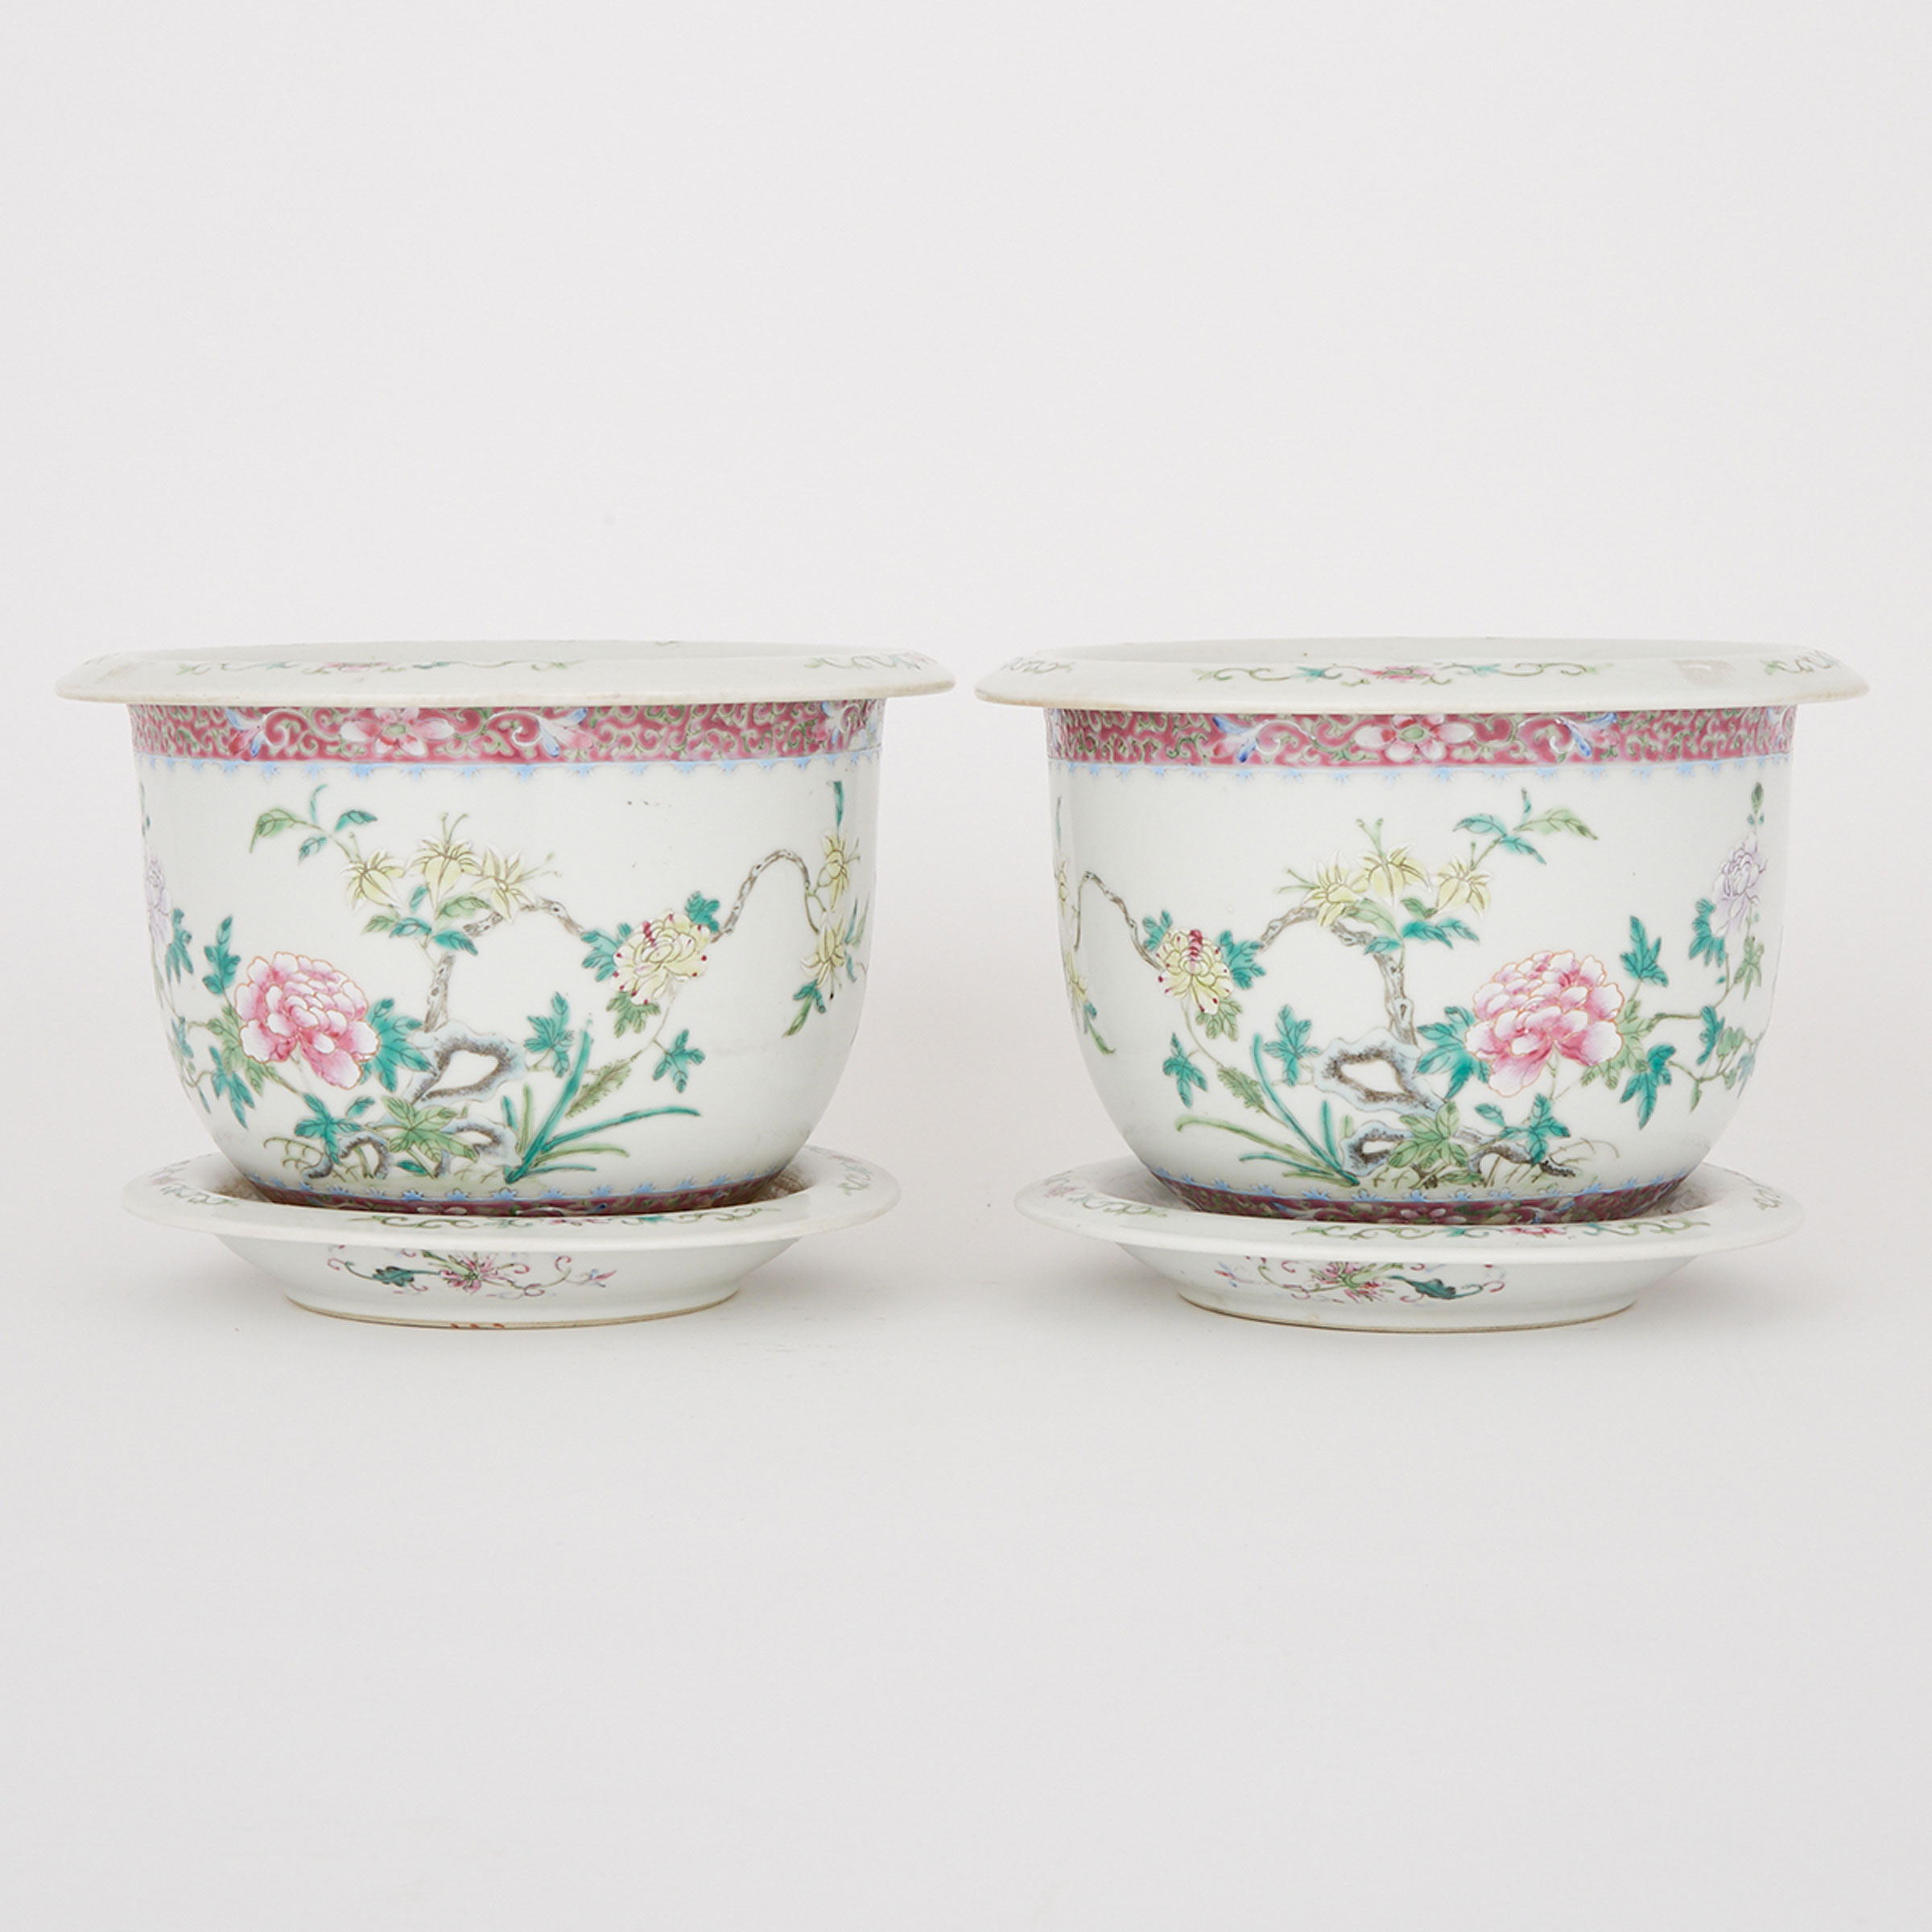 A Pair of Famille Rose Planters, Hongxian Mark